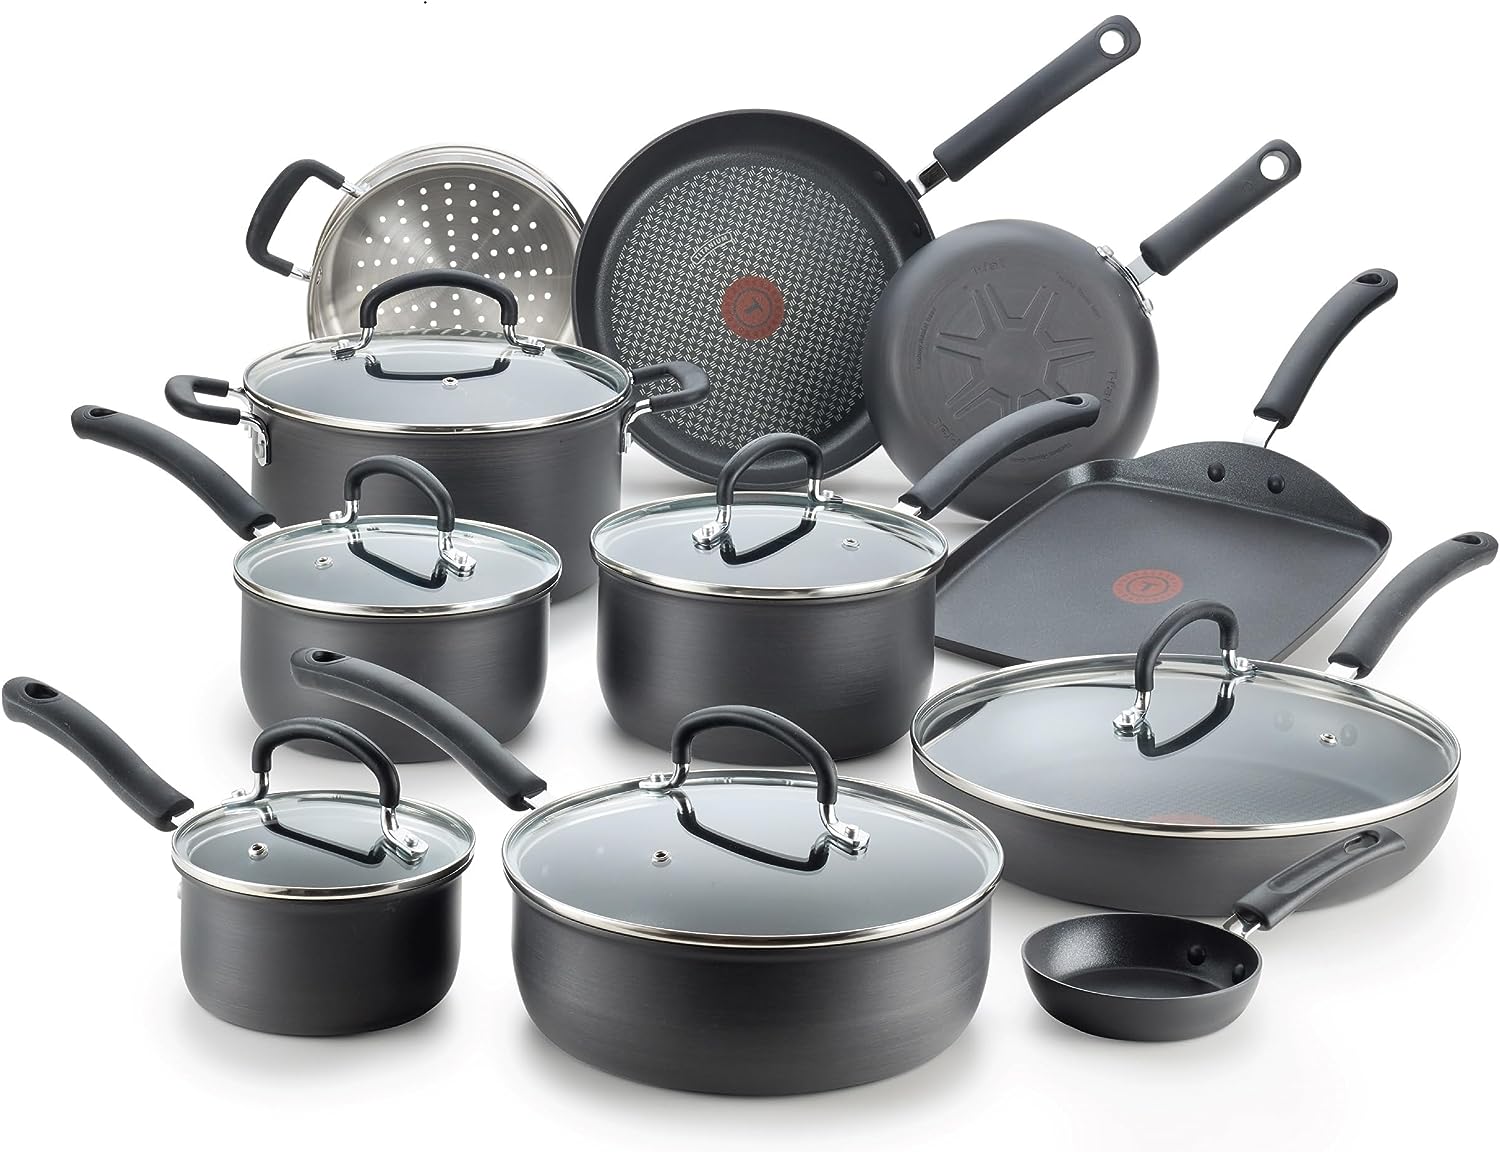 T-fal Ultimate Hard Anodized Nonstick Cookware Set 17 Piece Oven Safe 400F